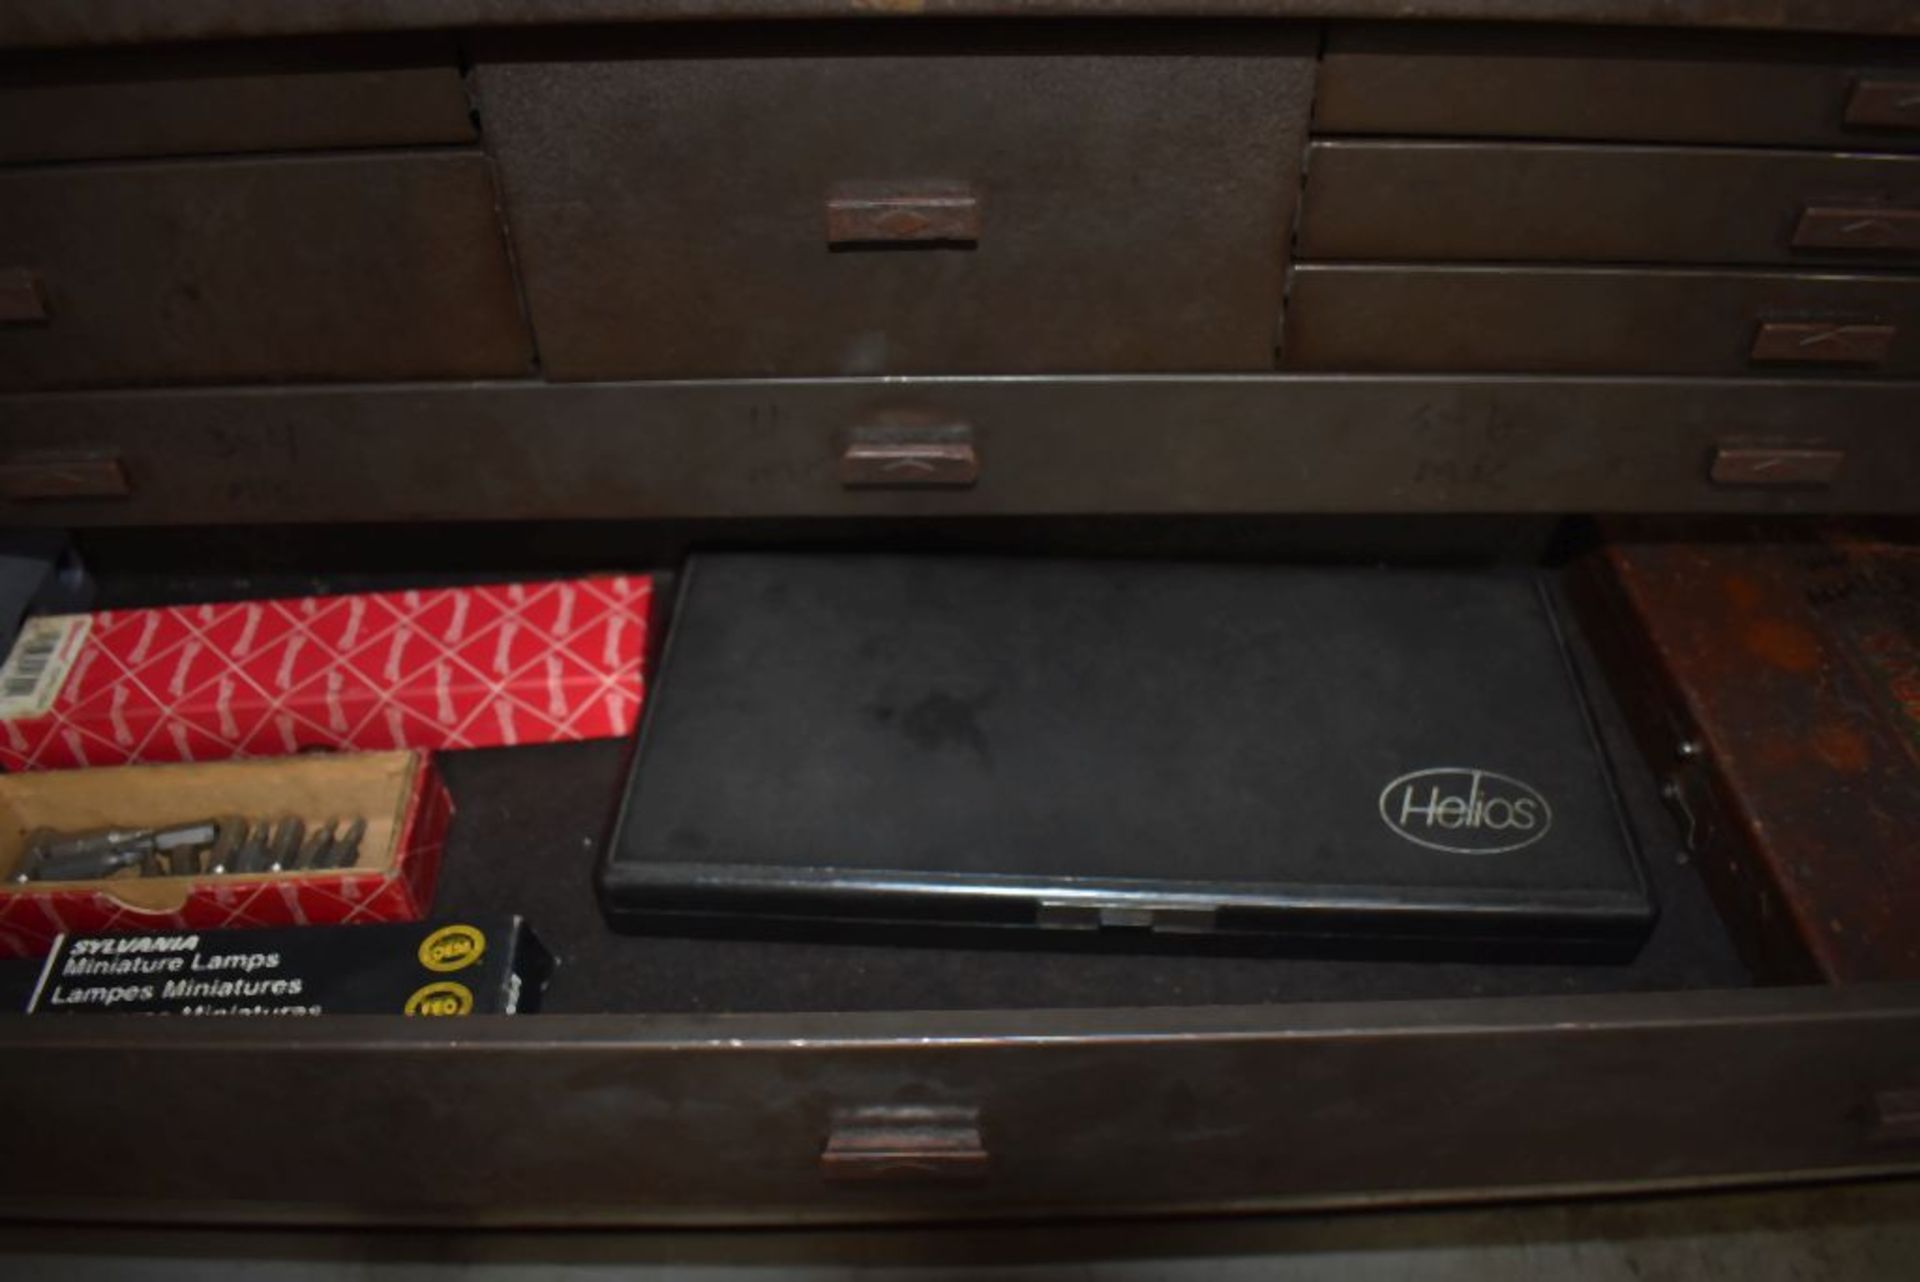 EIGHT DRAWER KENNEDY TOOL BOX WITH CONTENTS, MISC. MEASURING DEVICES, 26 1/2"L x 8 1/2"D x 13 1/2"H - Image 6 of 6